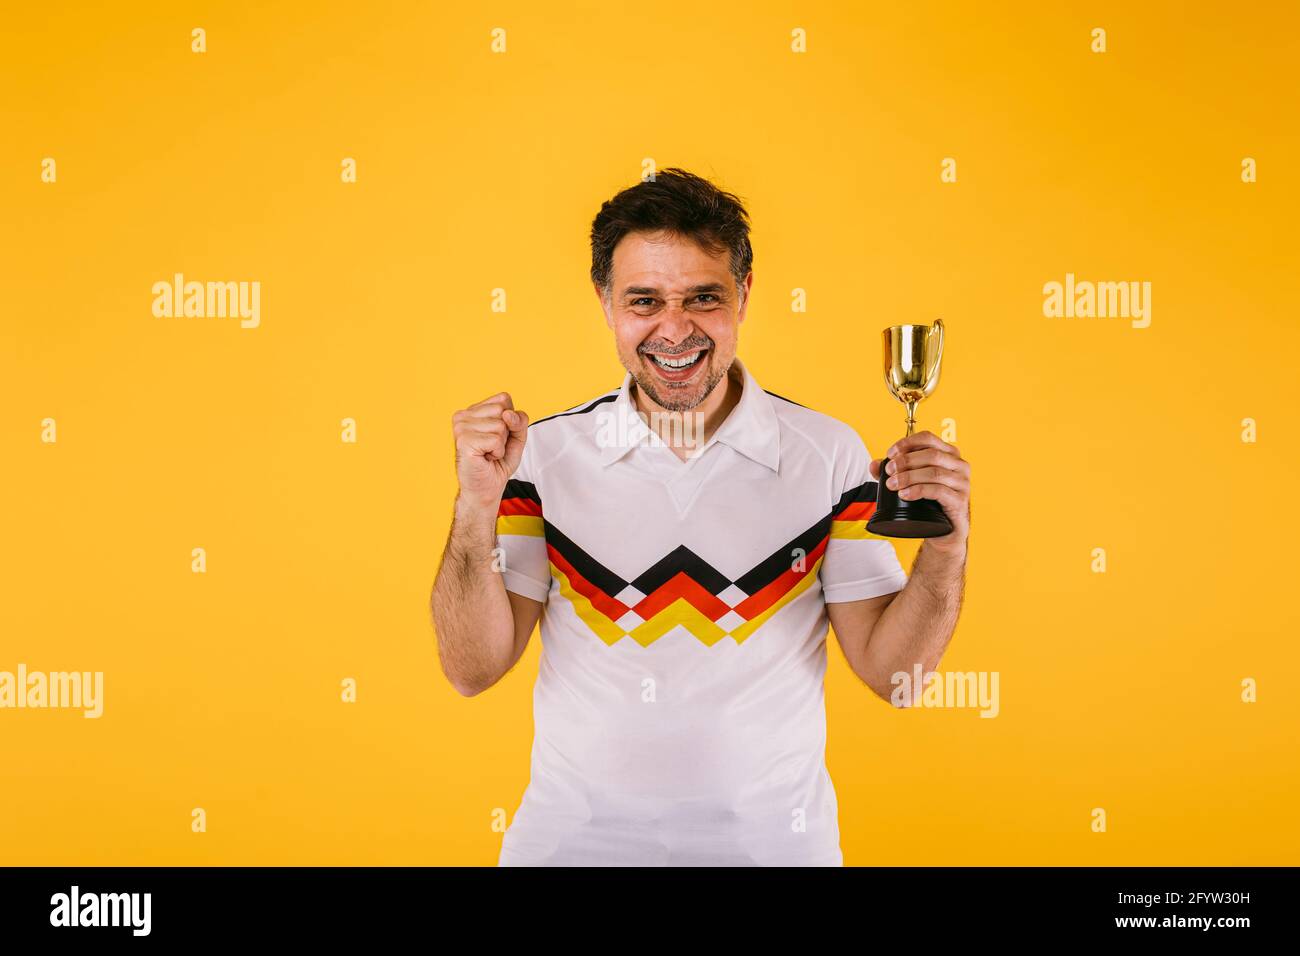 Soccer fan wearing a white t-shirt with black, red and yellow stripes, he clenches his fist and holds a winner's trophy. Stock Photo